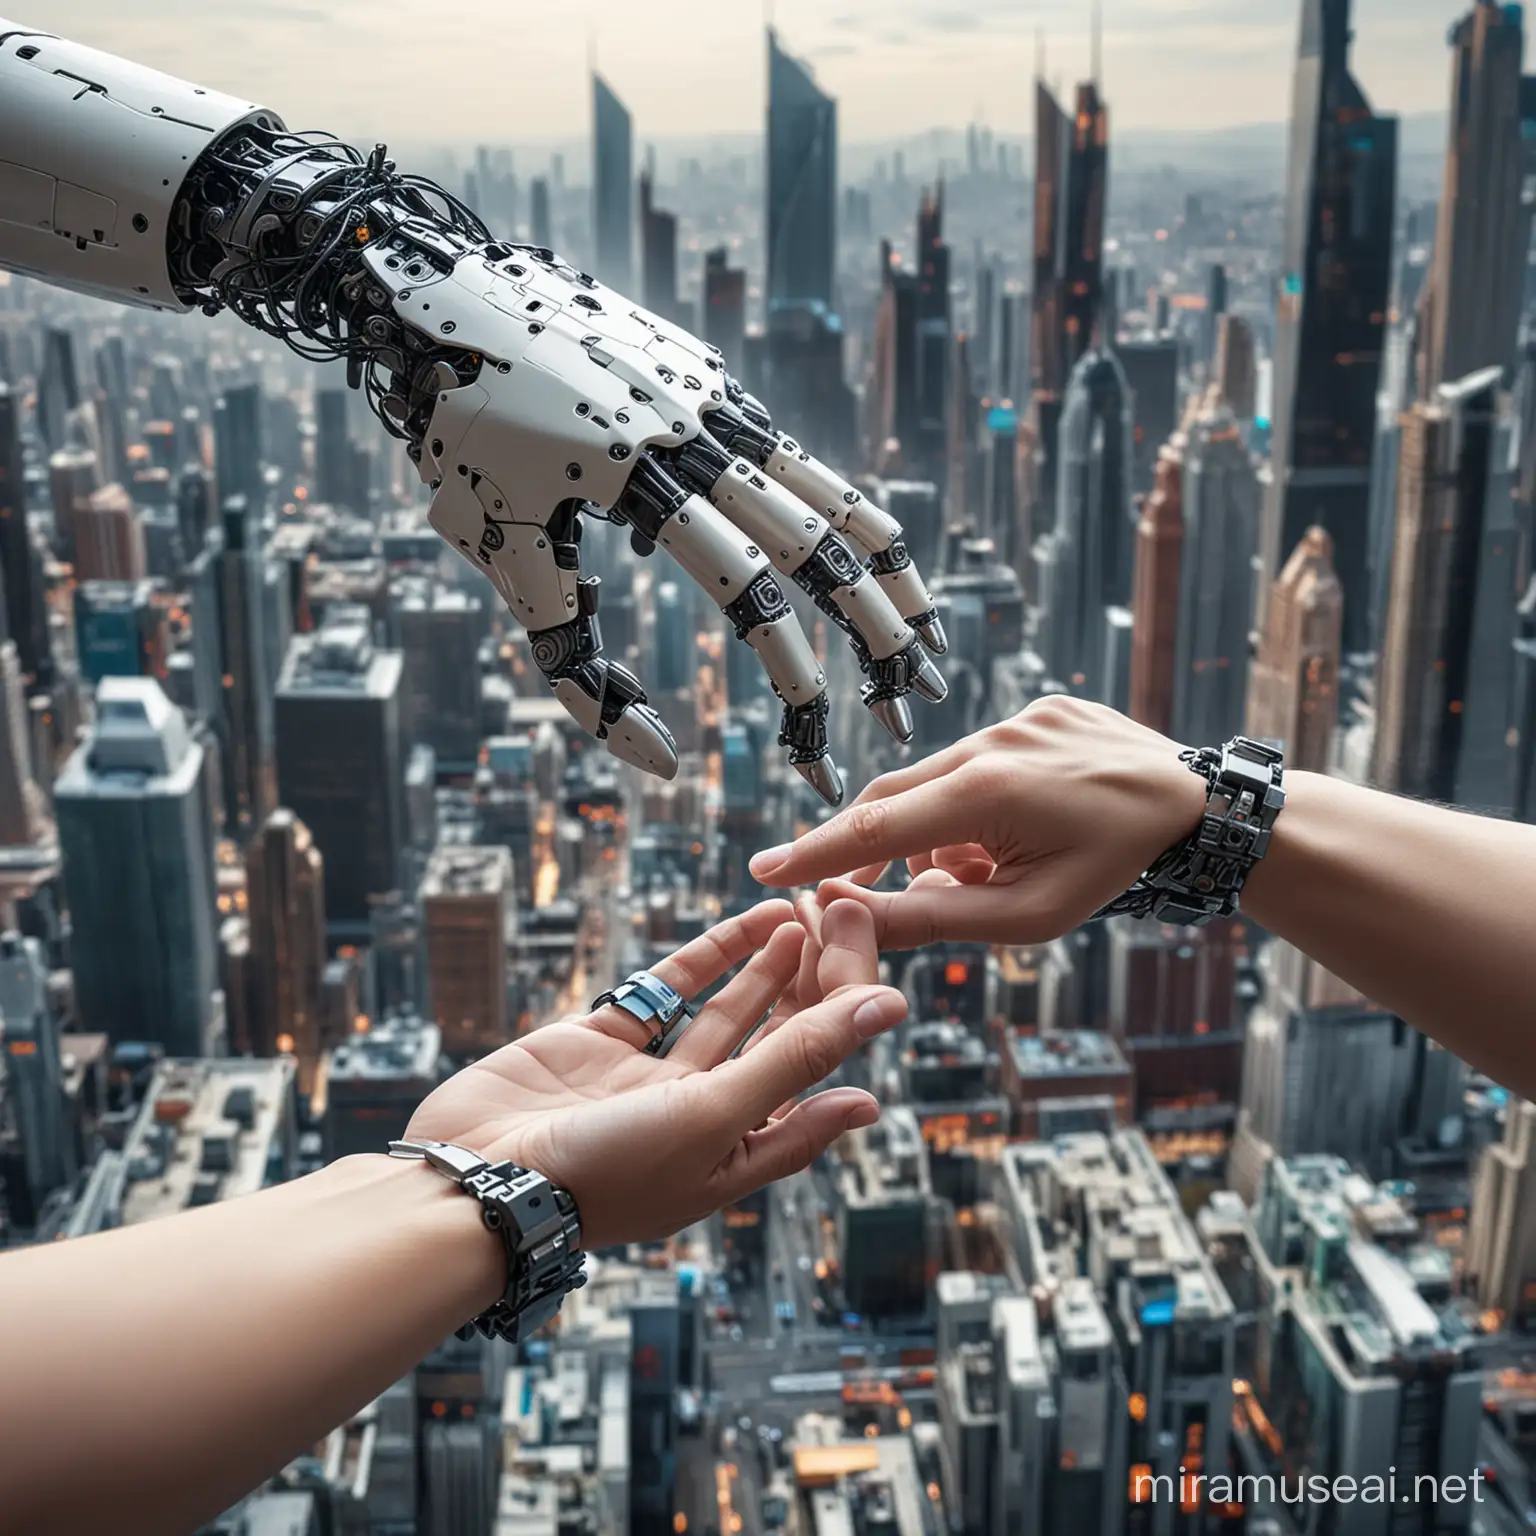 A photo of a human hand and a robotic hand with the tips of their indexes just about to touch. The hands are of the same size and are situated in the middle region of an A4 size sheet. The background is of a futuristic cityscape with humans and robotic humanoids interacting.